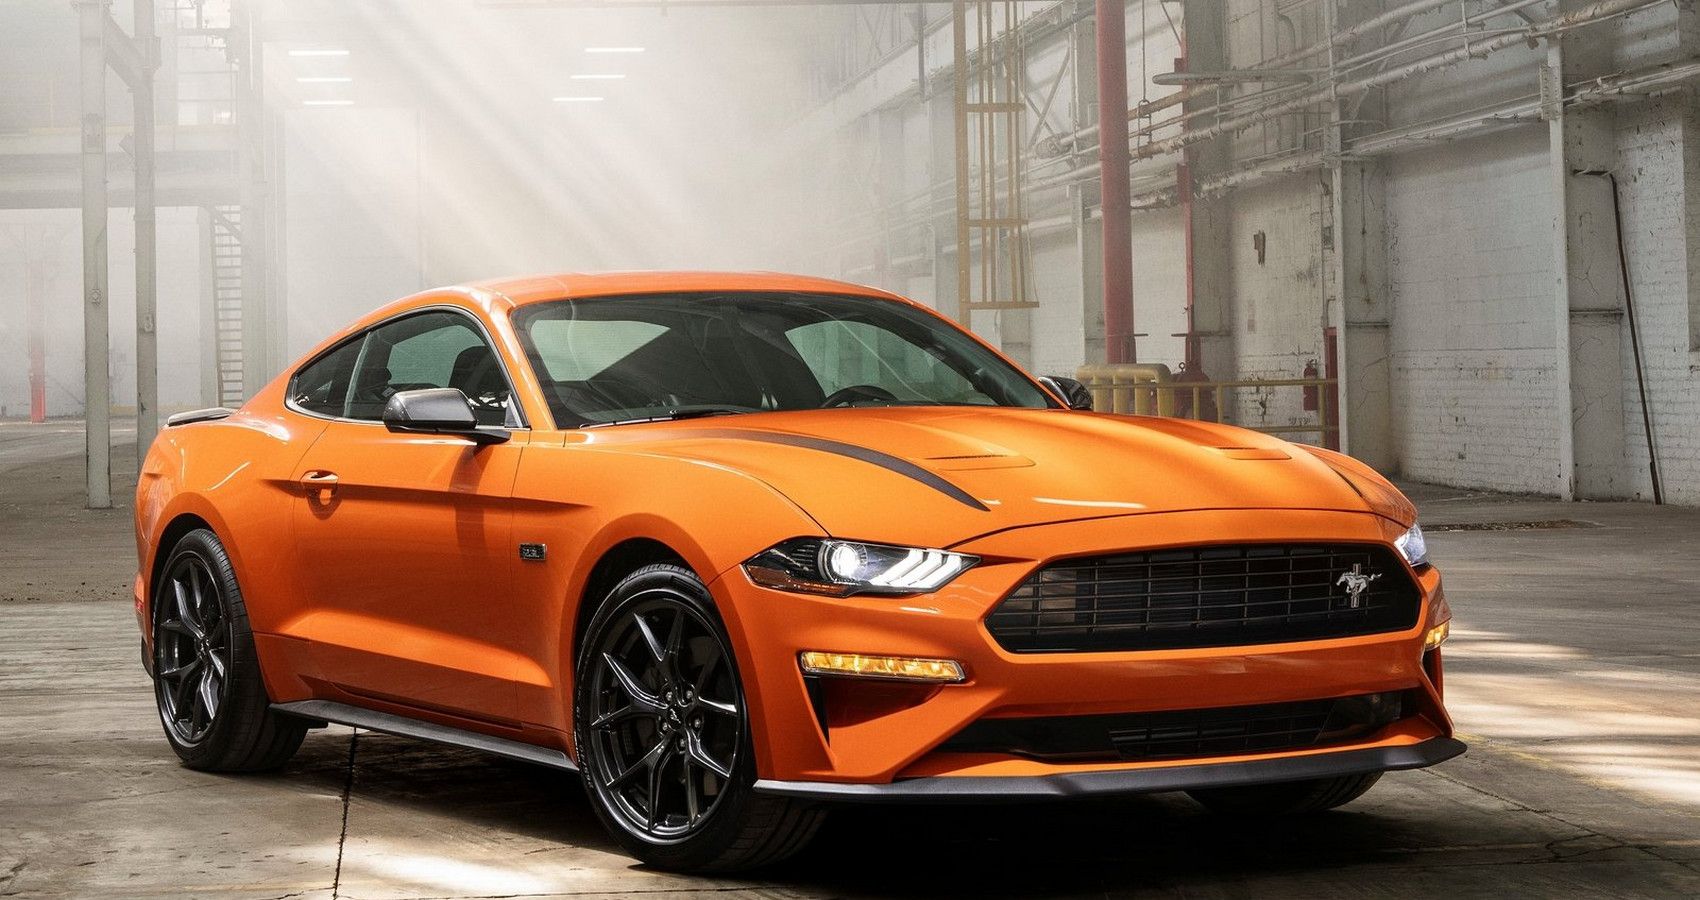 The 10 Most Common Problems With Ford Mustang Ownership